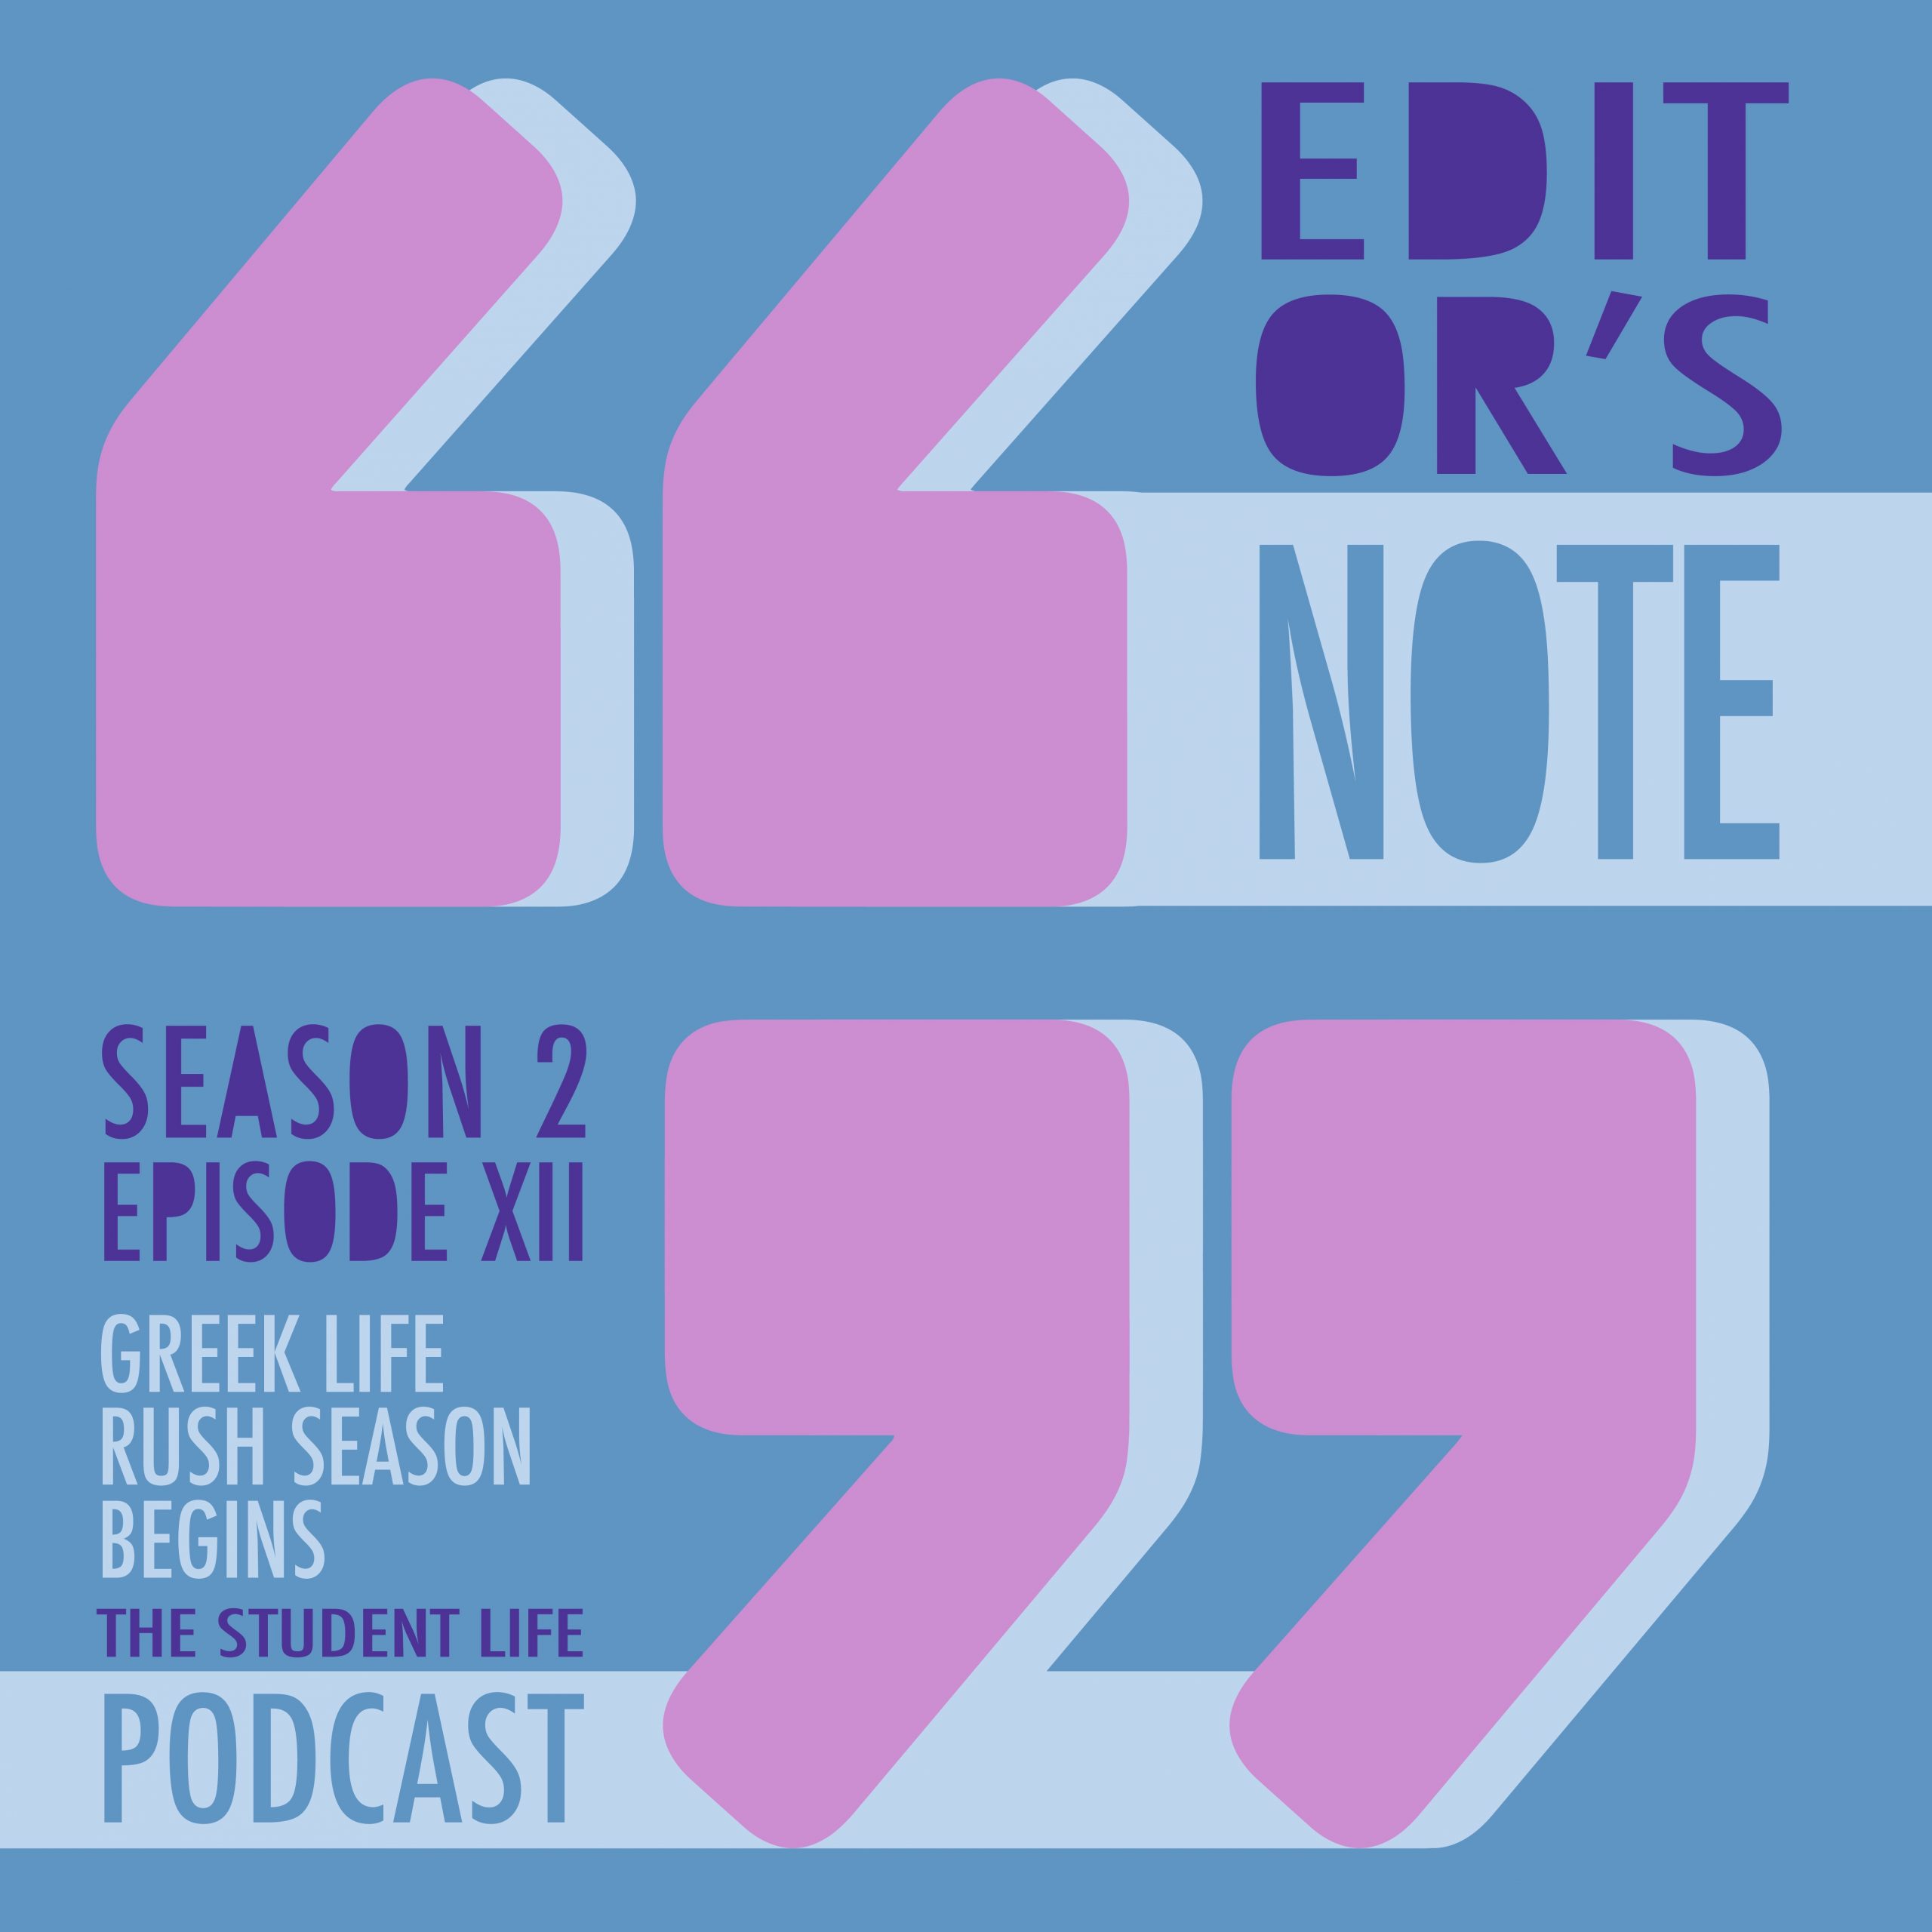 A graphic with two large pink quotation marks in the center in front of a light blue background. In the upper right hand corner, purple letters read "Editor's Note." In the lower left hand corner, purple and blue letters read "Season 2 Episode XI: Greek Life Rush Season Begins" and "The Student Life Podcast."